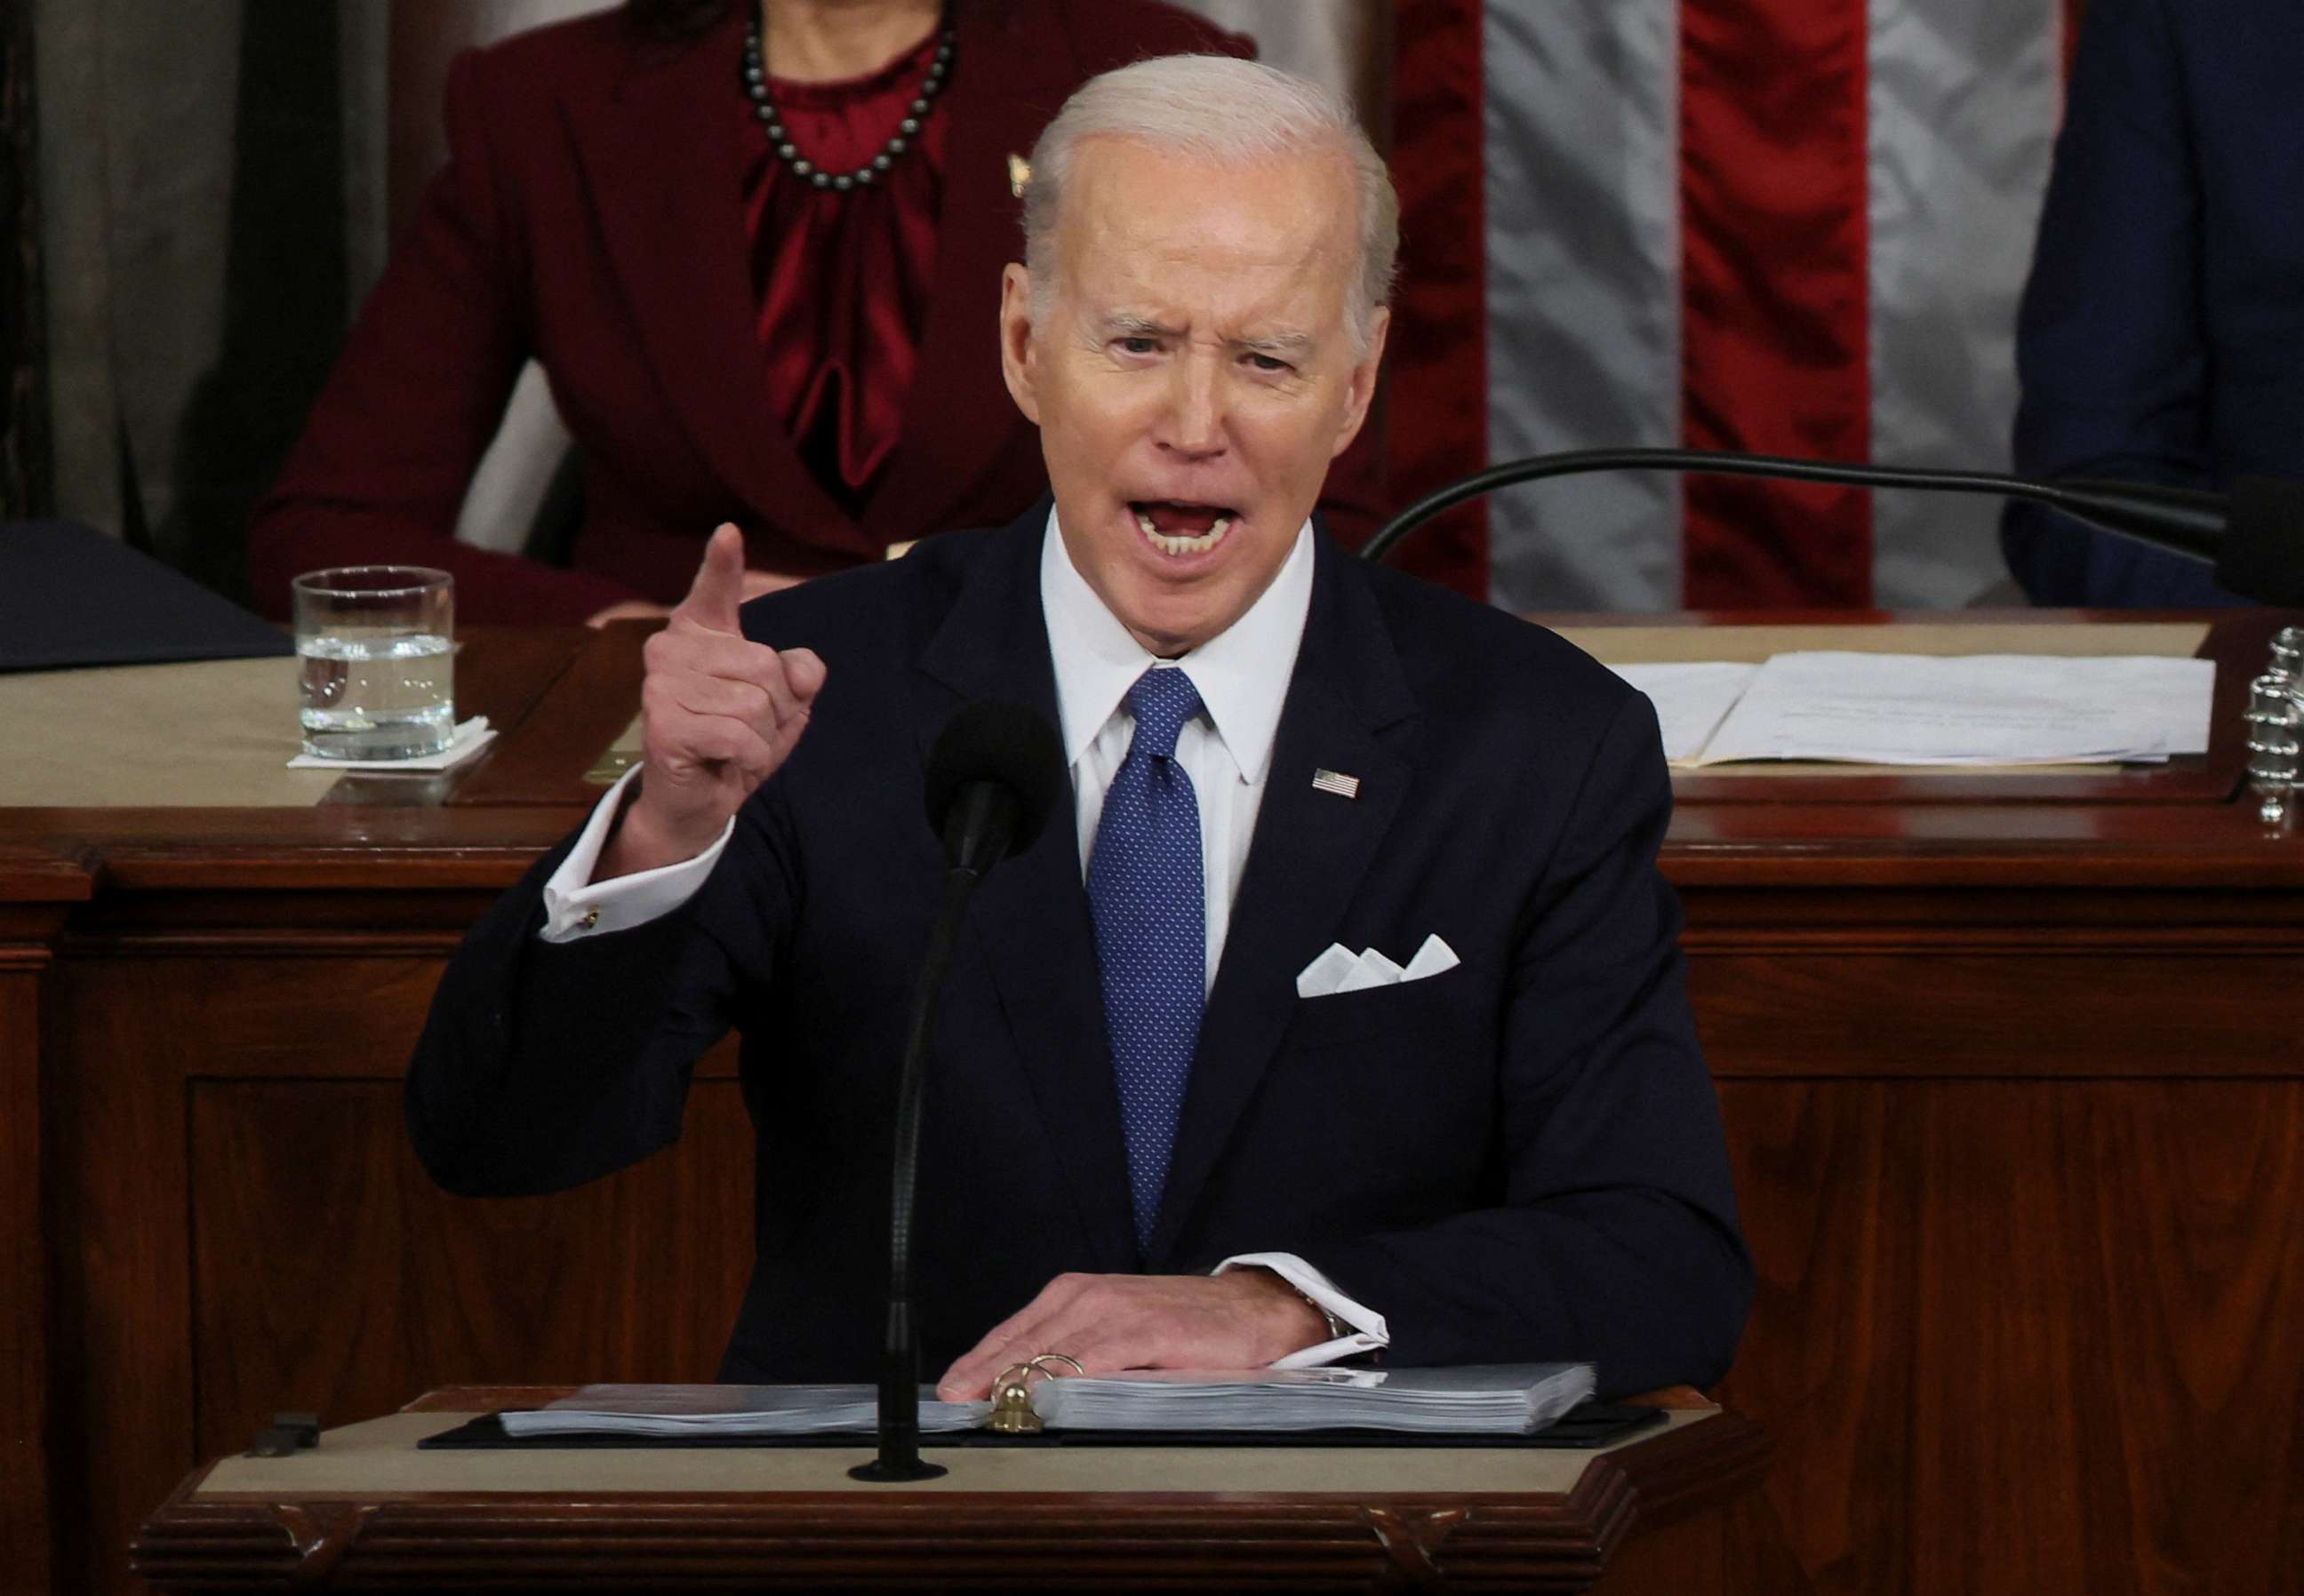 PHOTO: President Joe Biden delivers his State of the Union address during a joint session of Congress in the House Chamber at the U.S. Capitol in Washington, Feb. 7, 2023.